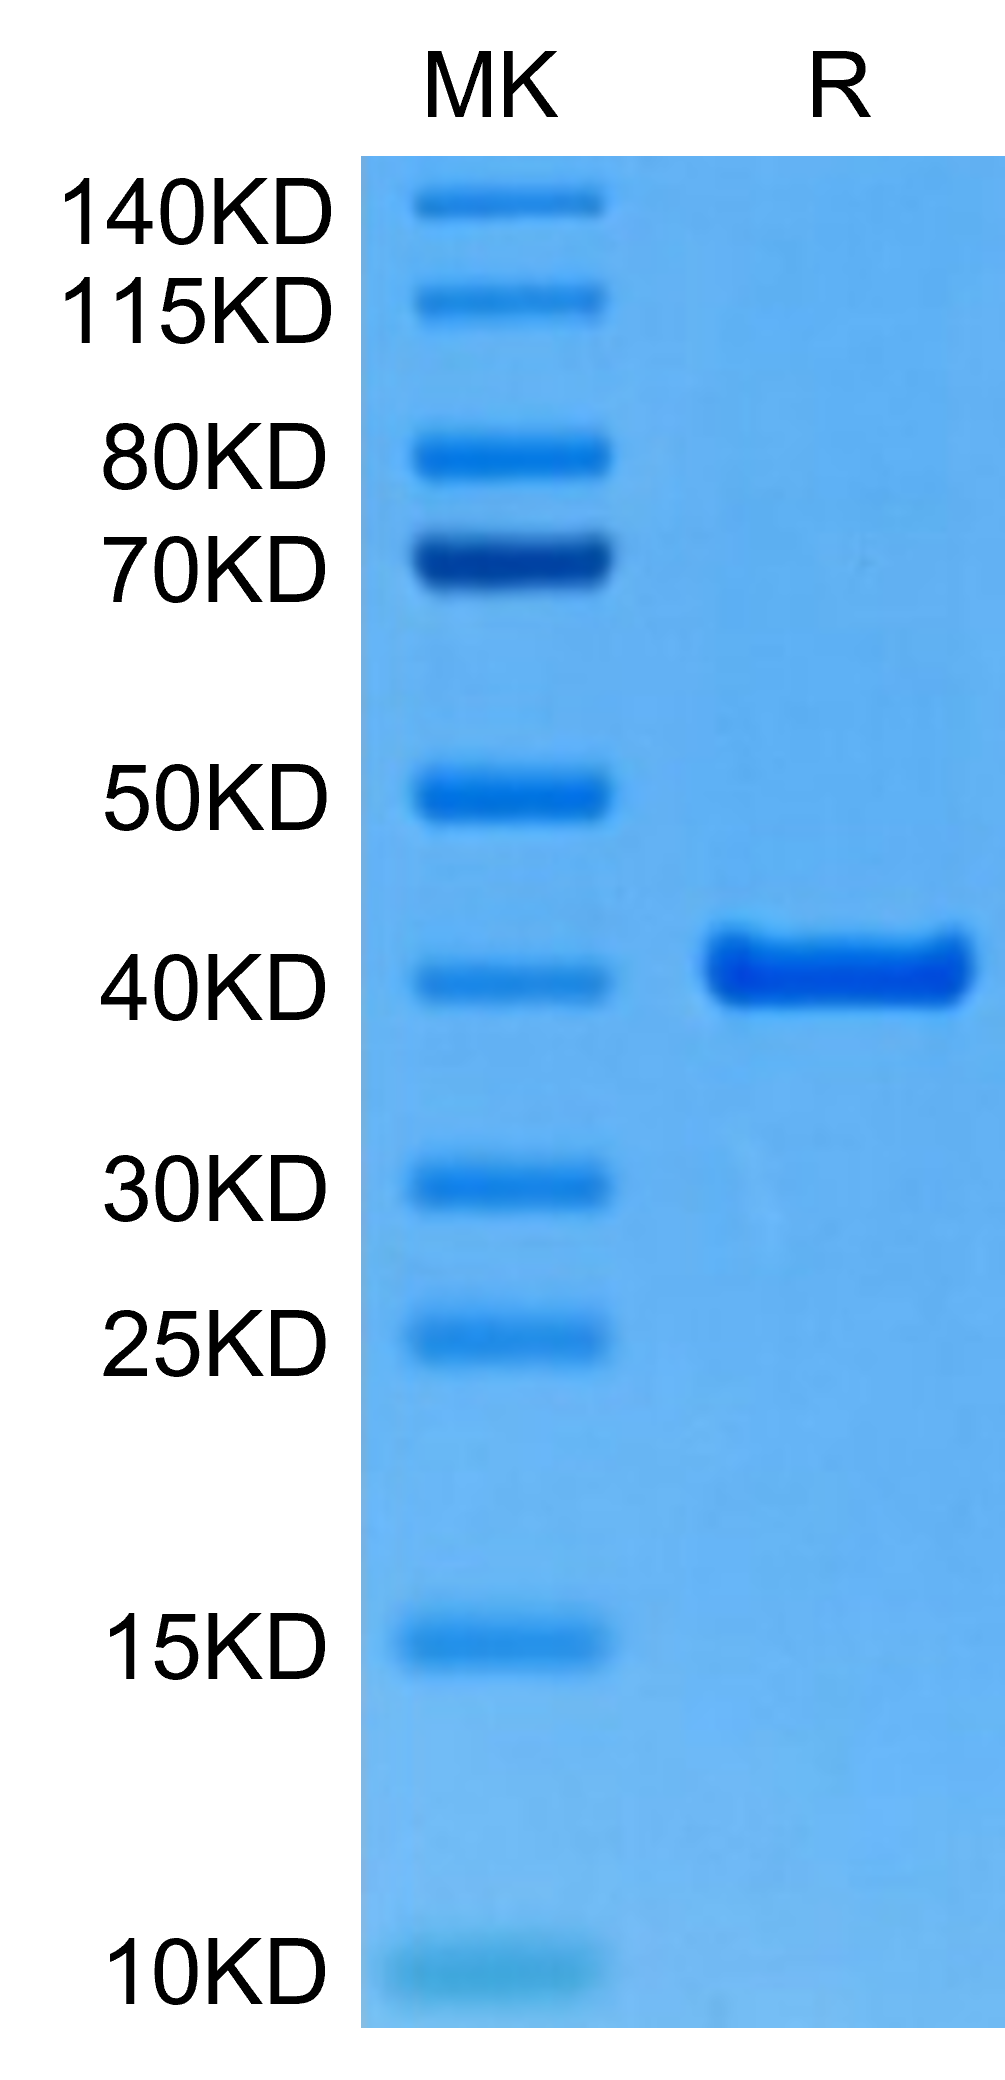 Mouse ANXA2 Protein (LTP10363)